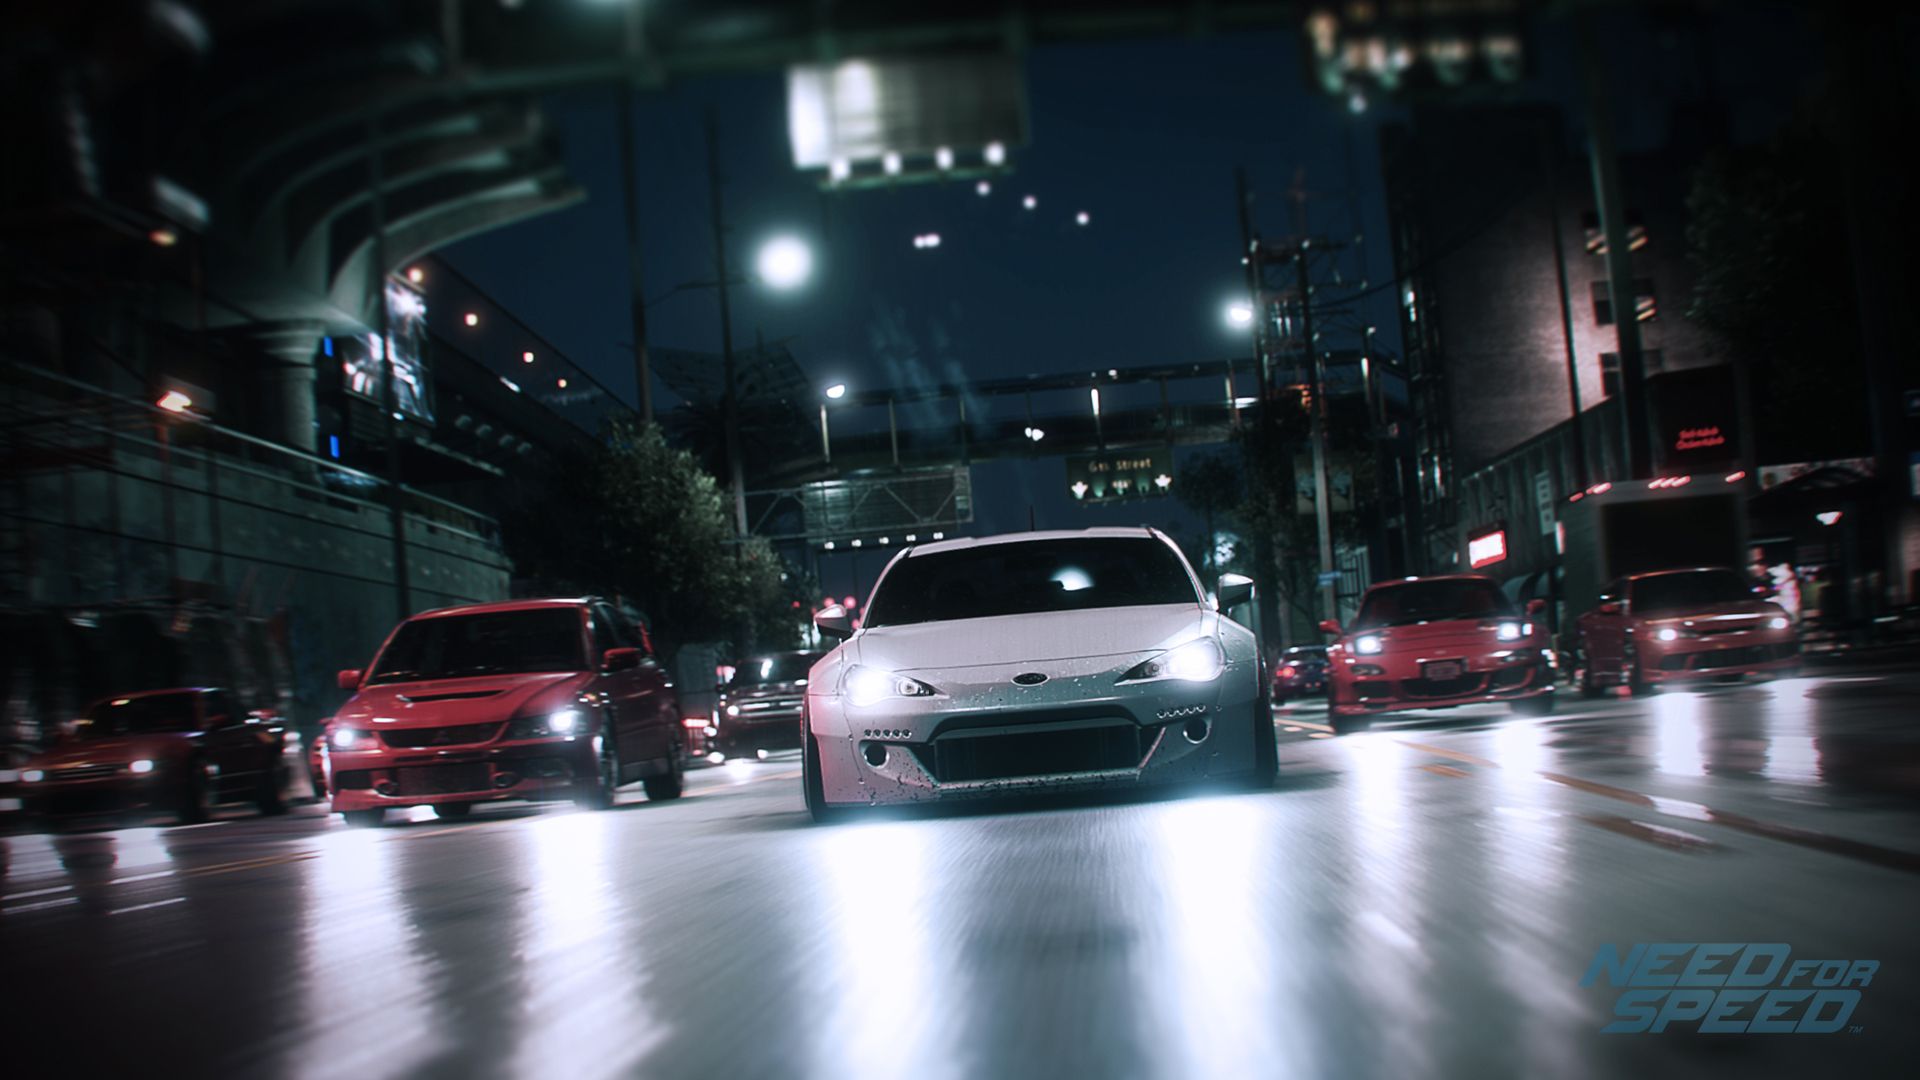 Need For Speed (2015) Wallpaper, Picture, Image